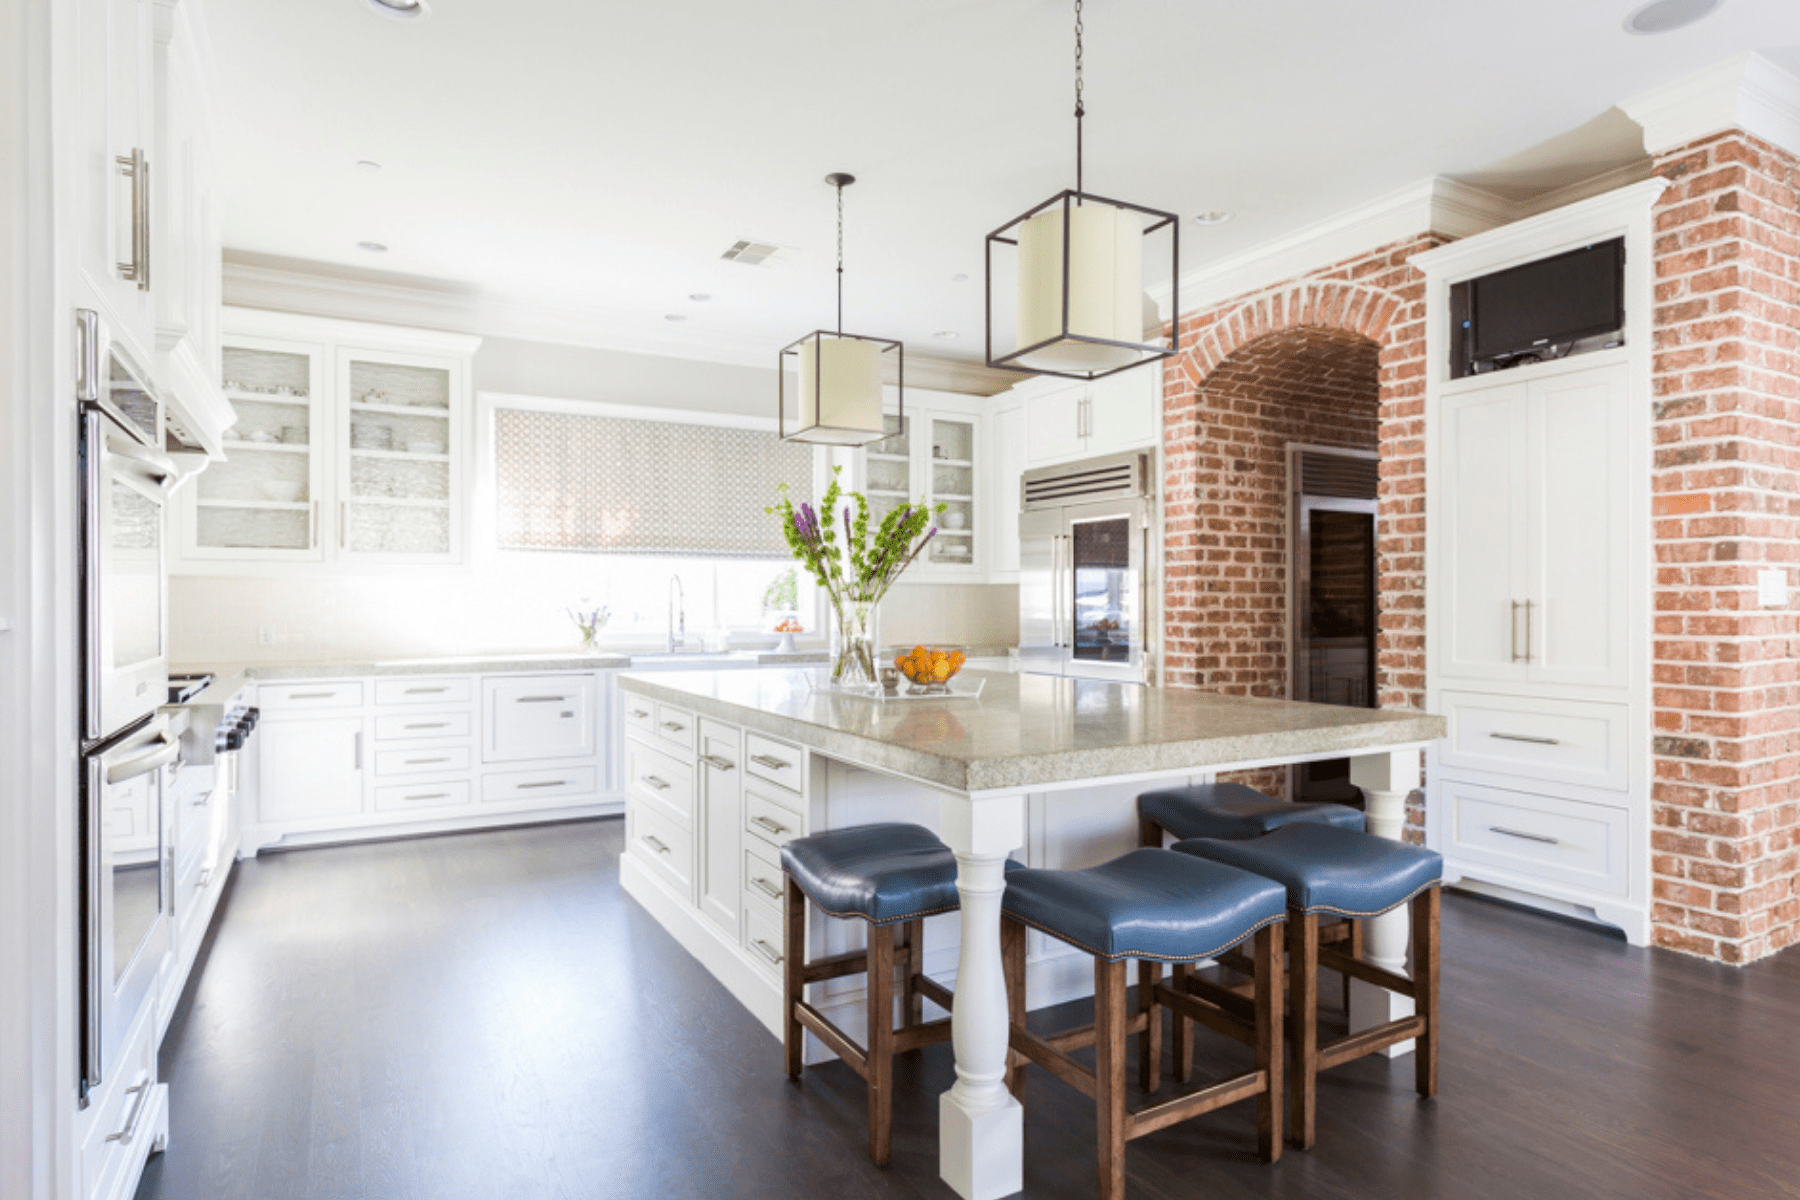 The Creekside kitchen featuring geometric light fixtures and elegant, white cabinetry.